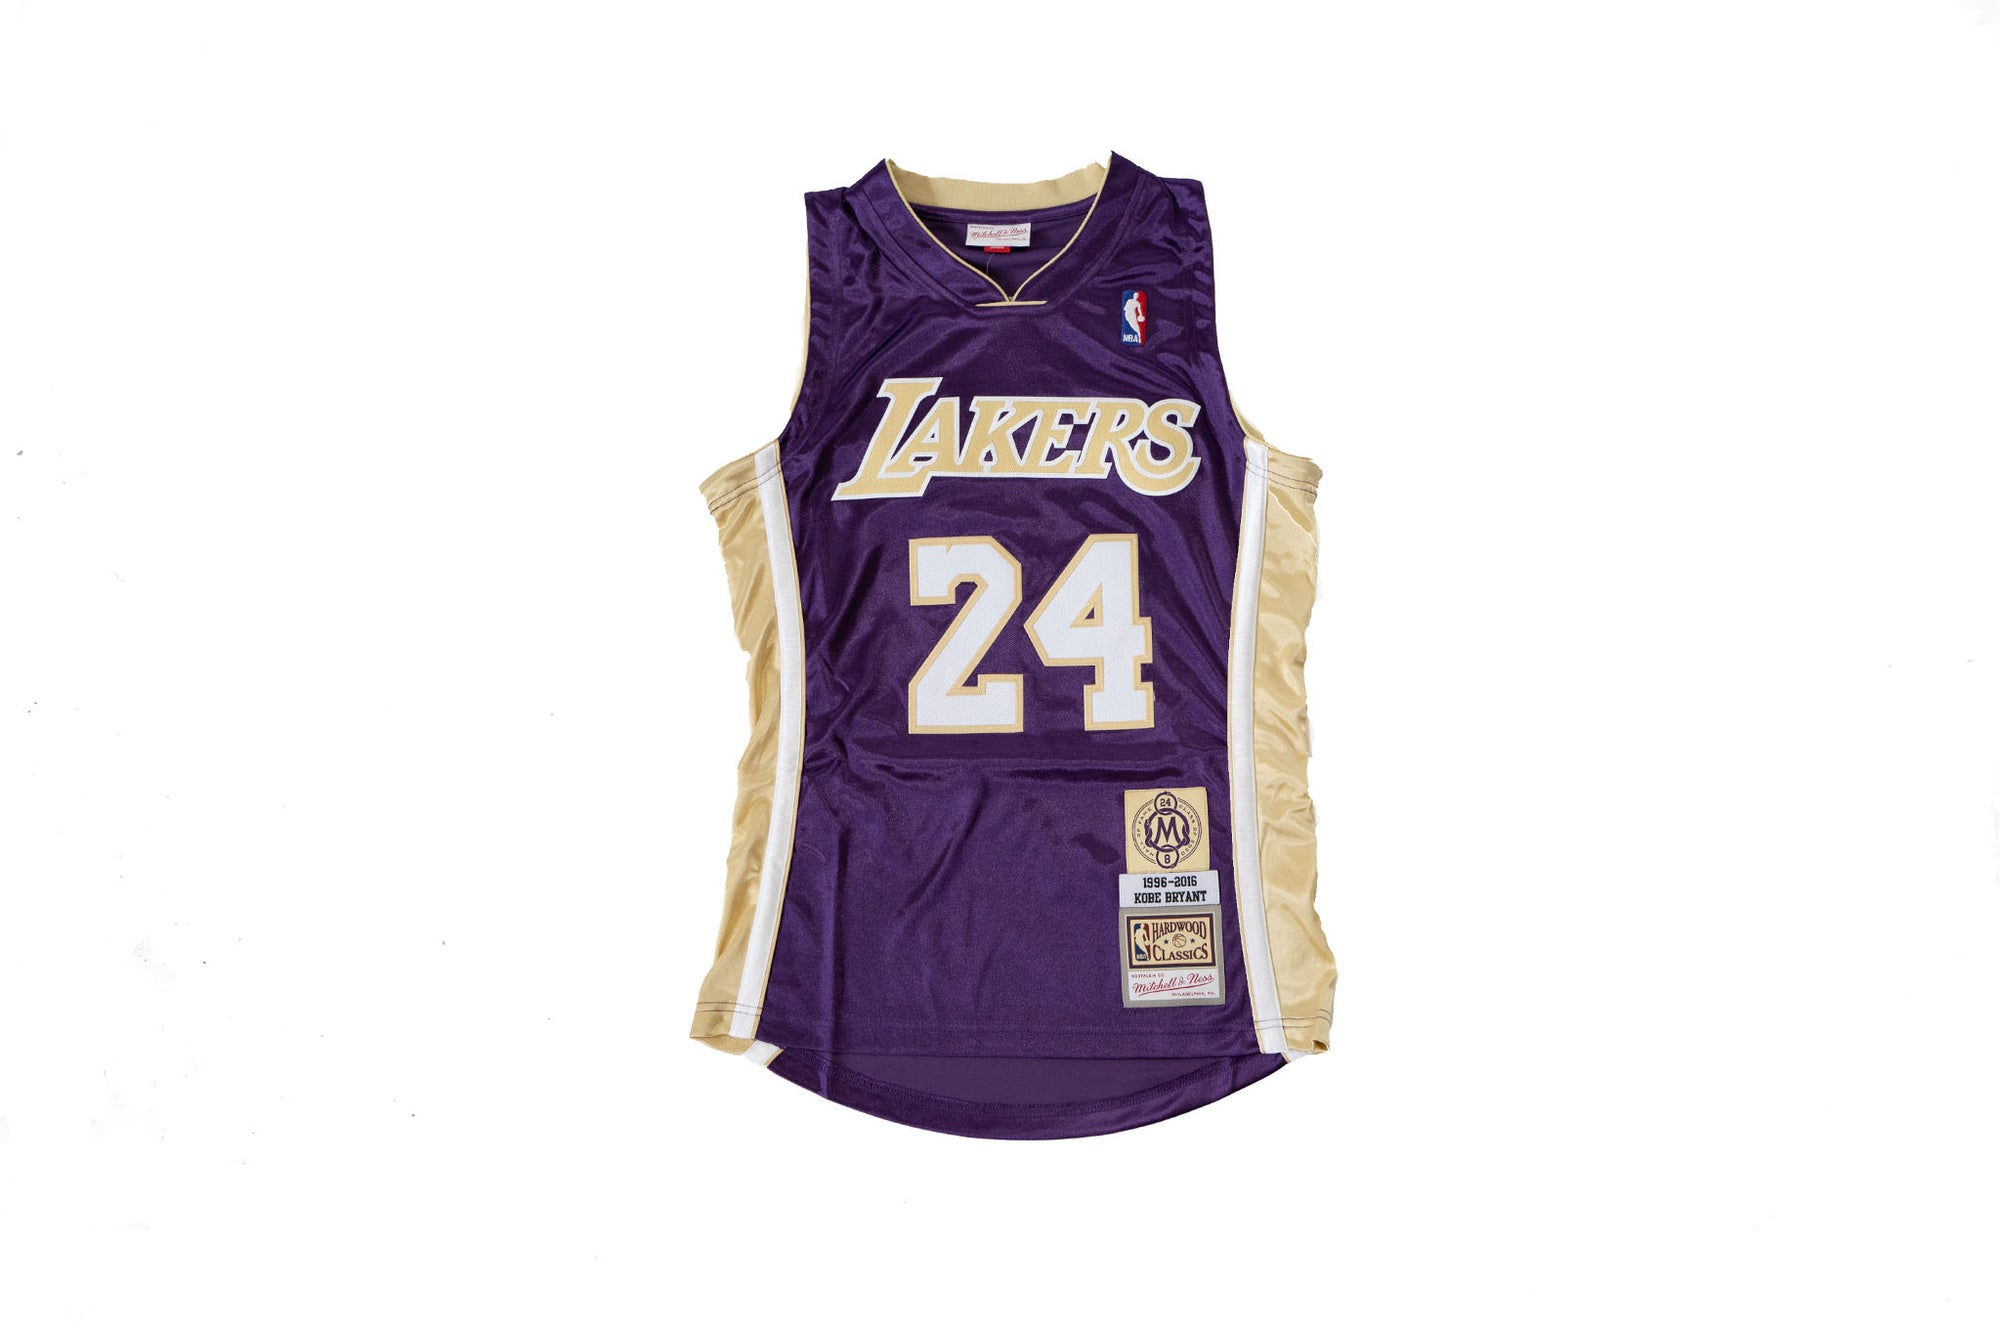 Mitchell & Ness Men's Los Angeles Lakers Authentic Jersey - Kobe